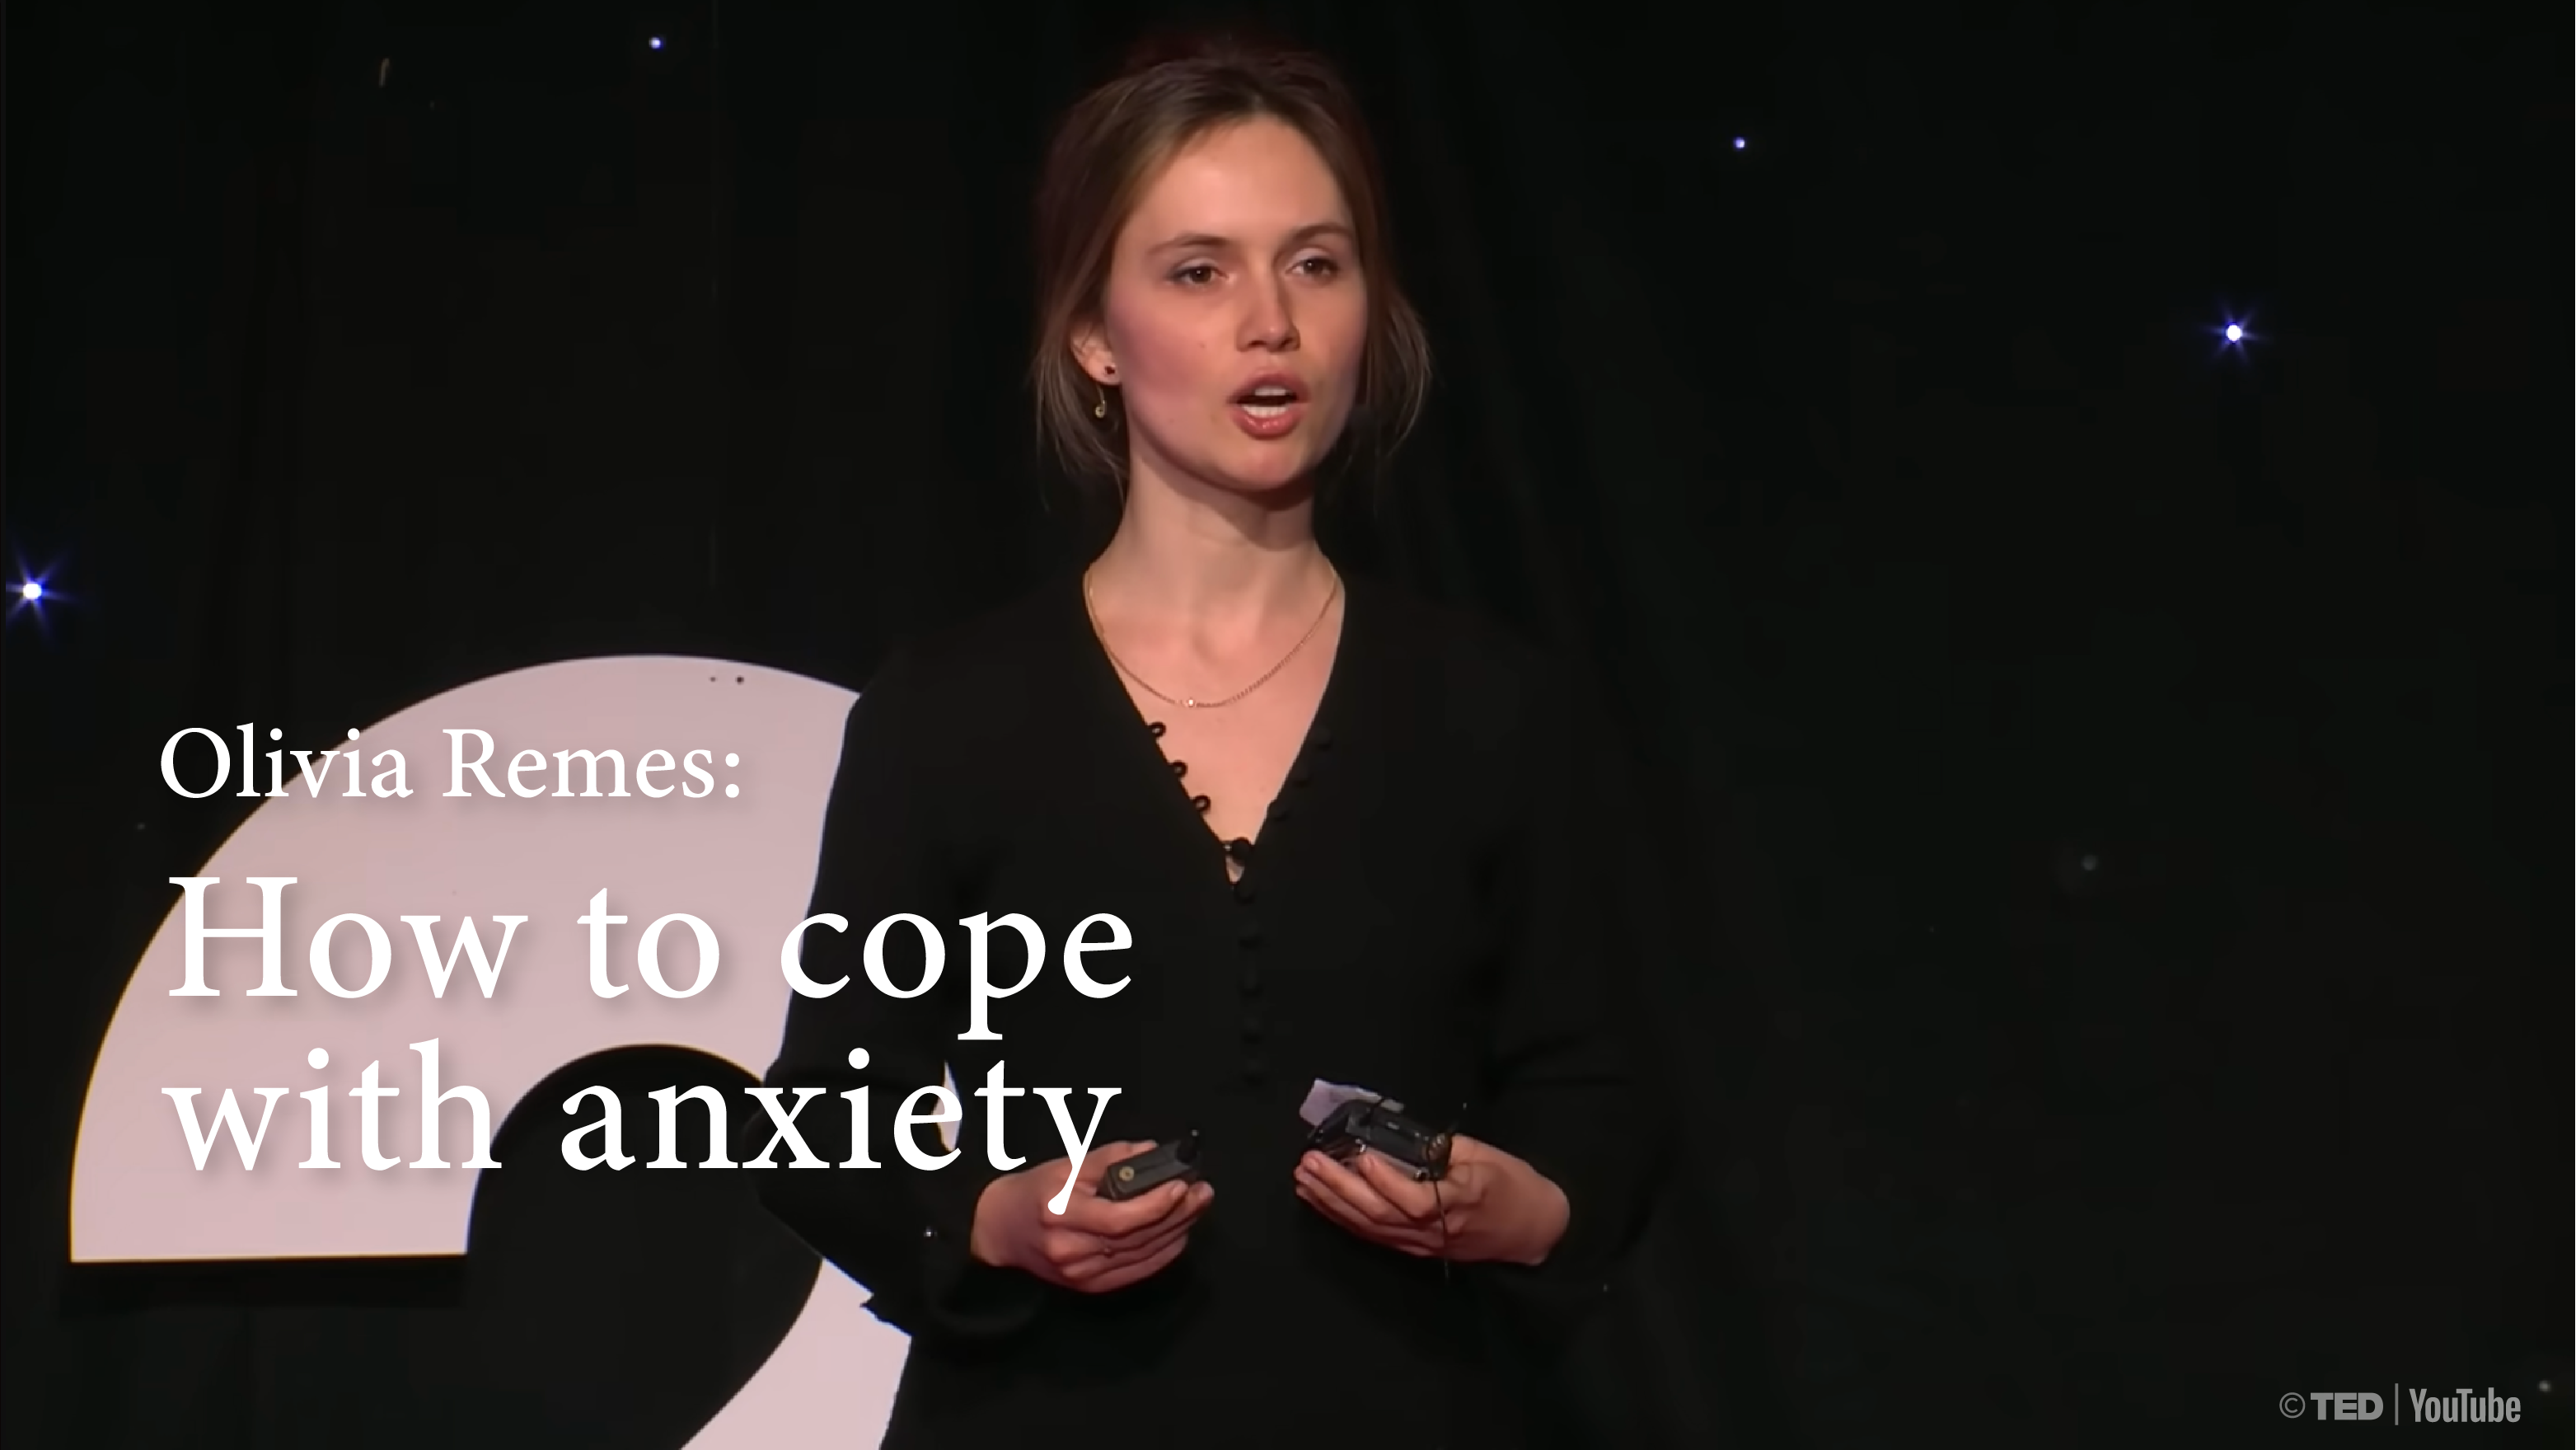 [B] How to cope with anxiety | Olivia Remes [PRACTICE]